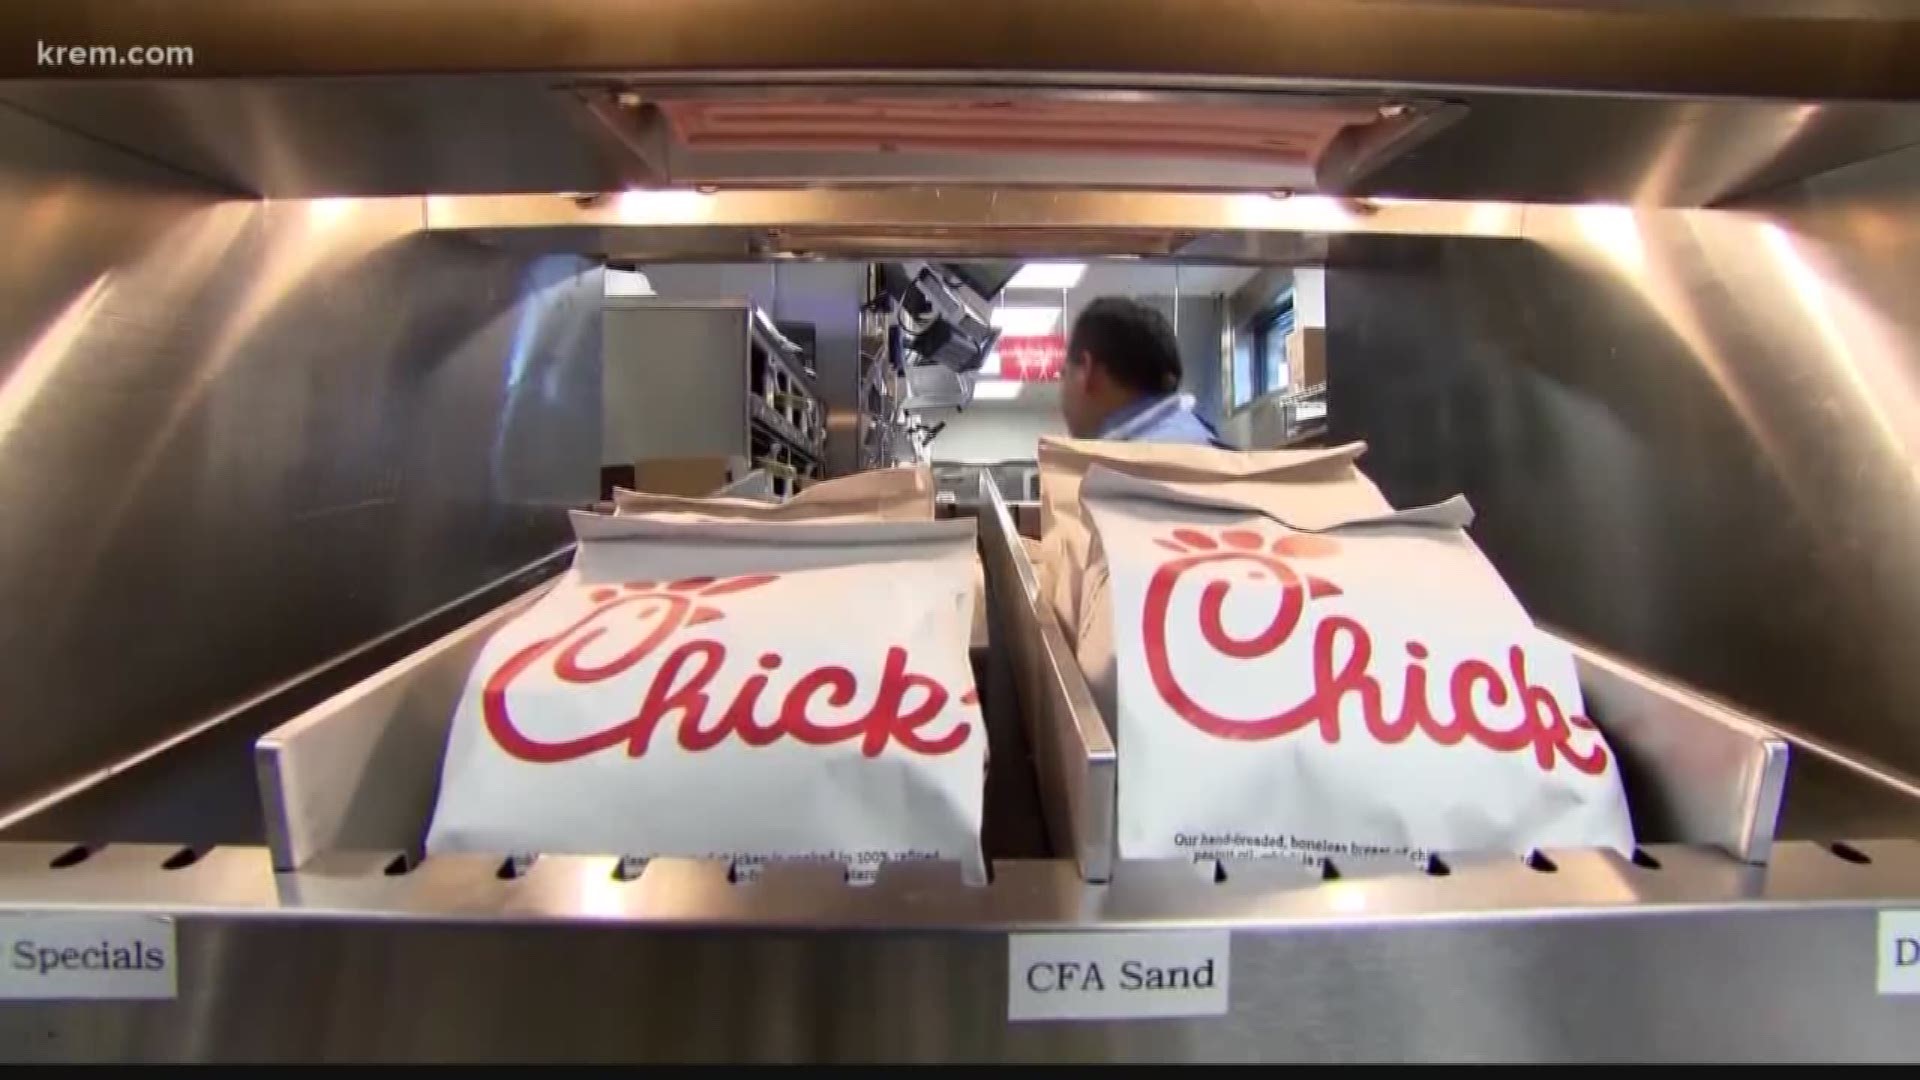 Spokane was left out of the popular chicken sandwich debate that flooded social media last week. Chick fil- a was right in the middle of the whole fiasco and according to their twitter they might not be coming to Spokane.